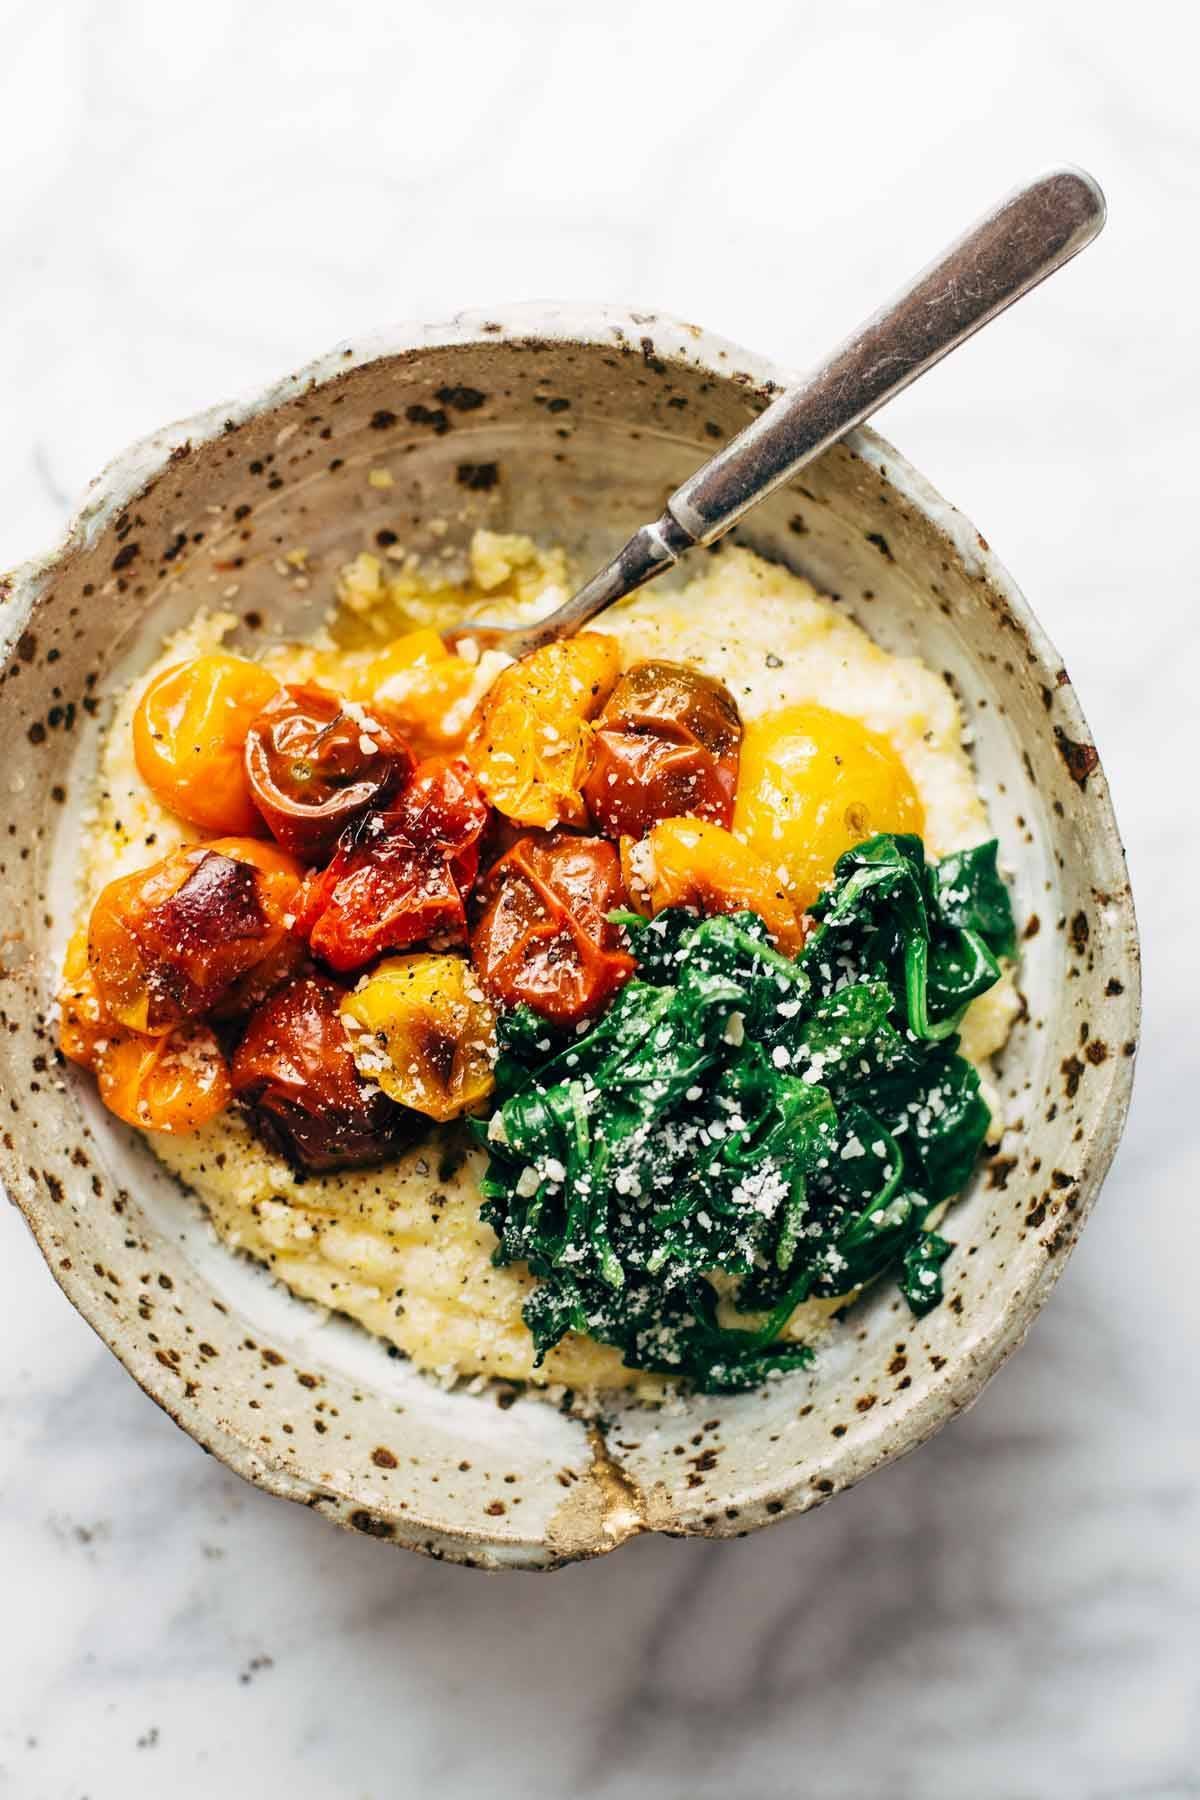 Roasted Tomatoes with Goat Cheese Polenta ♡ an easy vegetarian recipe adaptable to whatever veggies you have on hand. Healthy meets comfort food! | pinchofyum.com